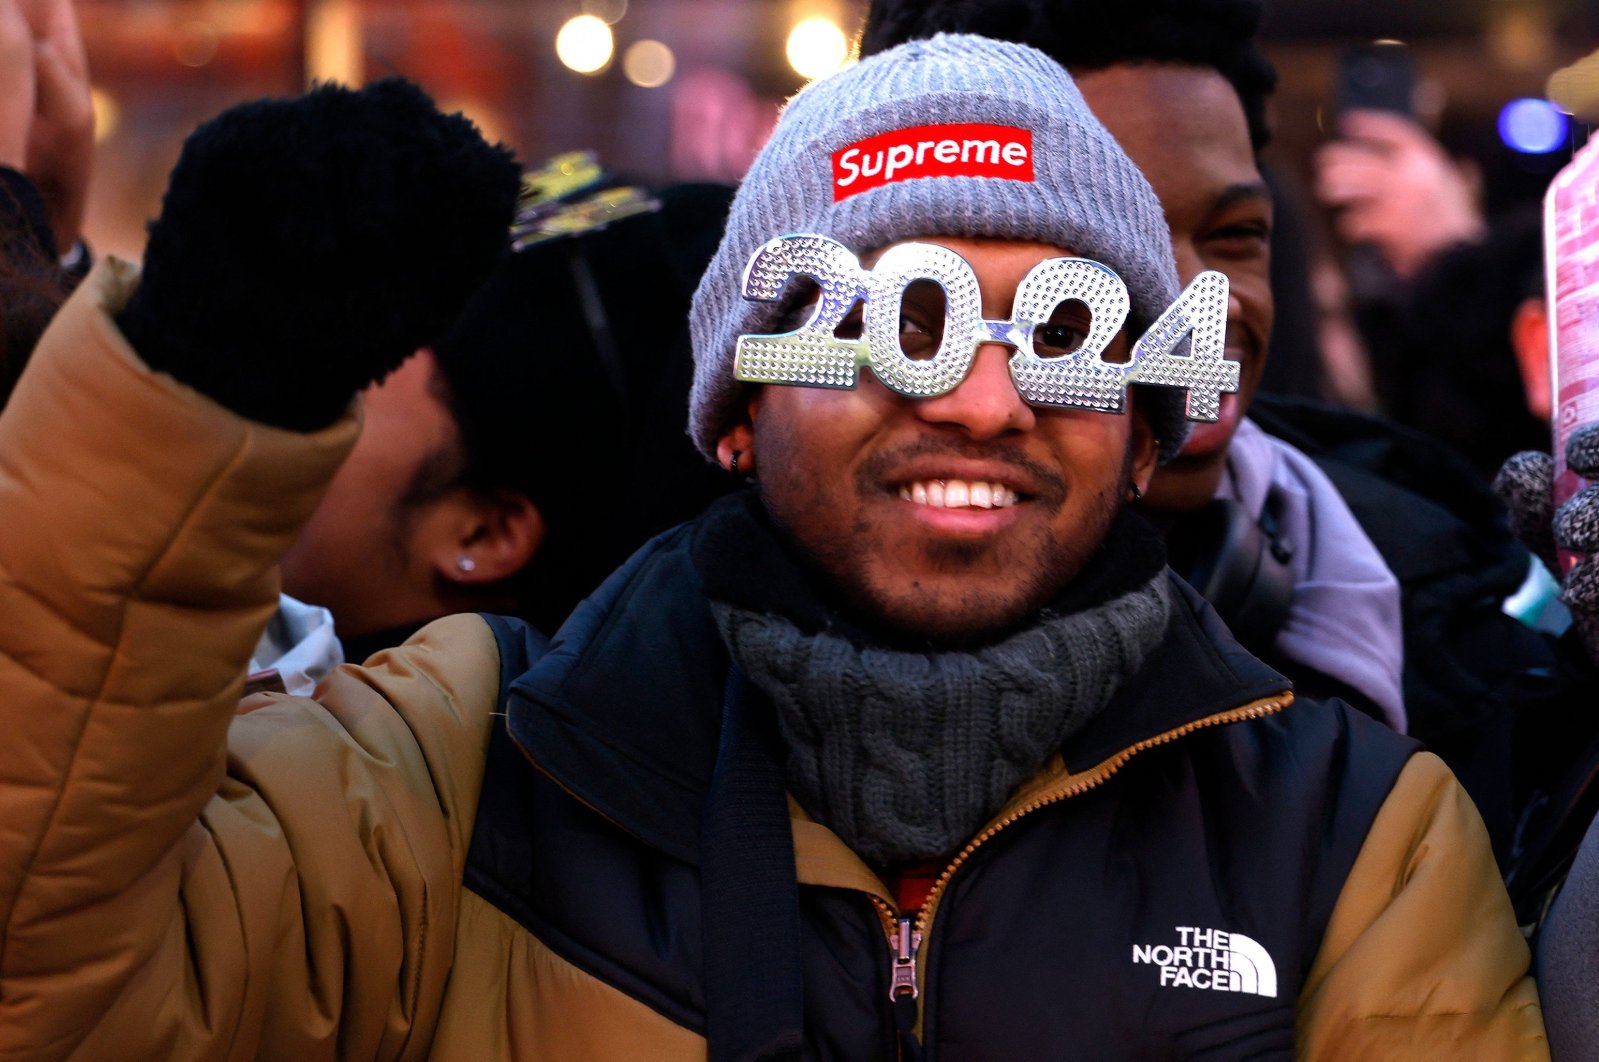 Revelers get ready to celebrate the New Year’s Eve Ball drop in Times Square, New York City, U.S., Dec. 31, 2024. (AFP Photo)